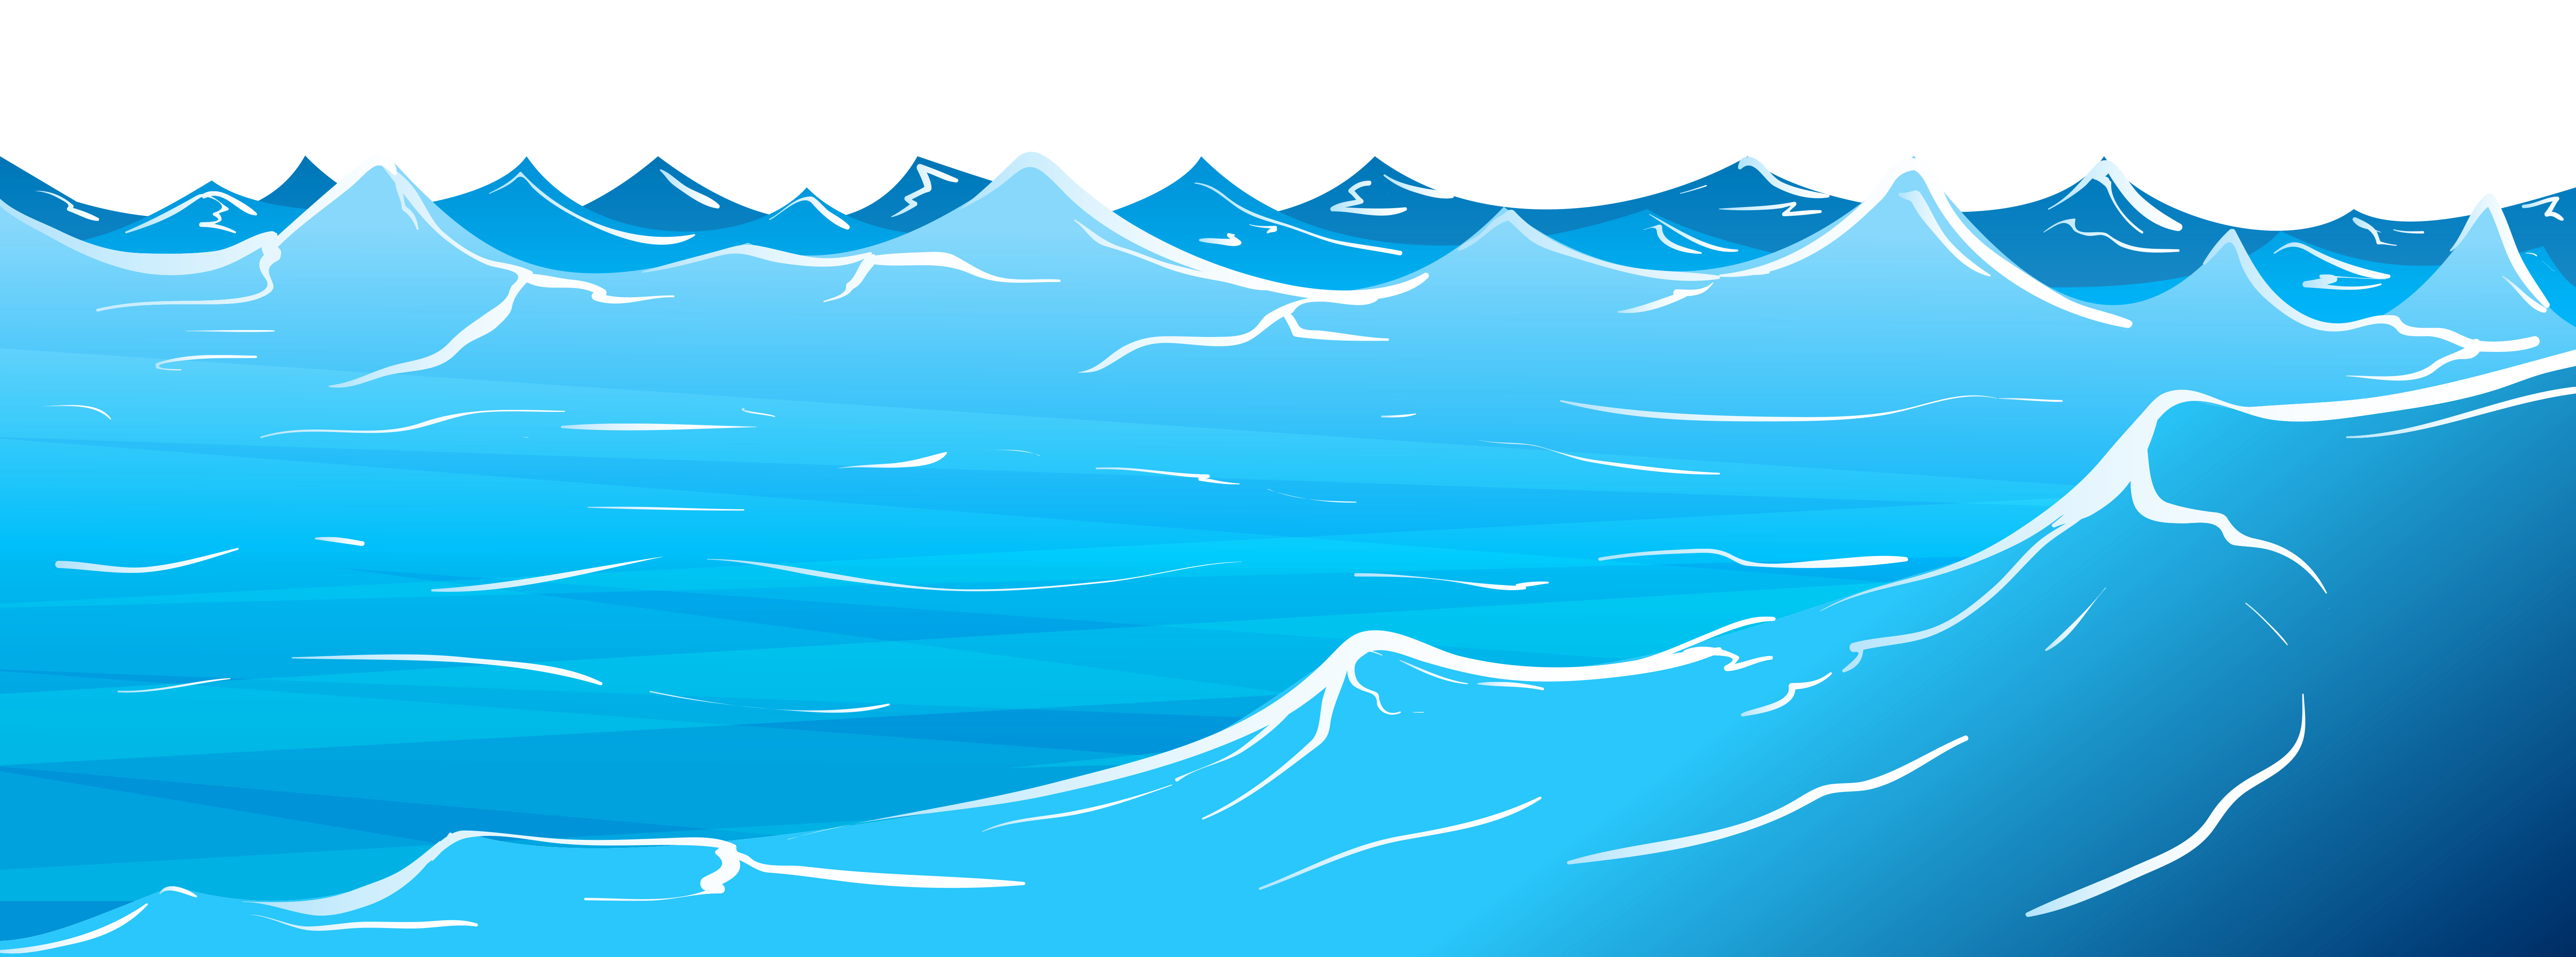 Land clipart land ocean.  collection of high